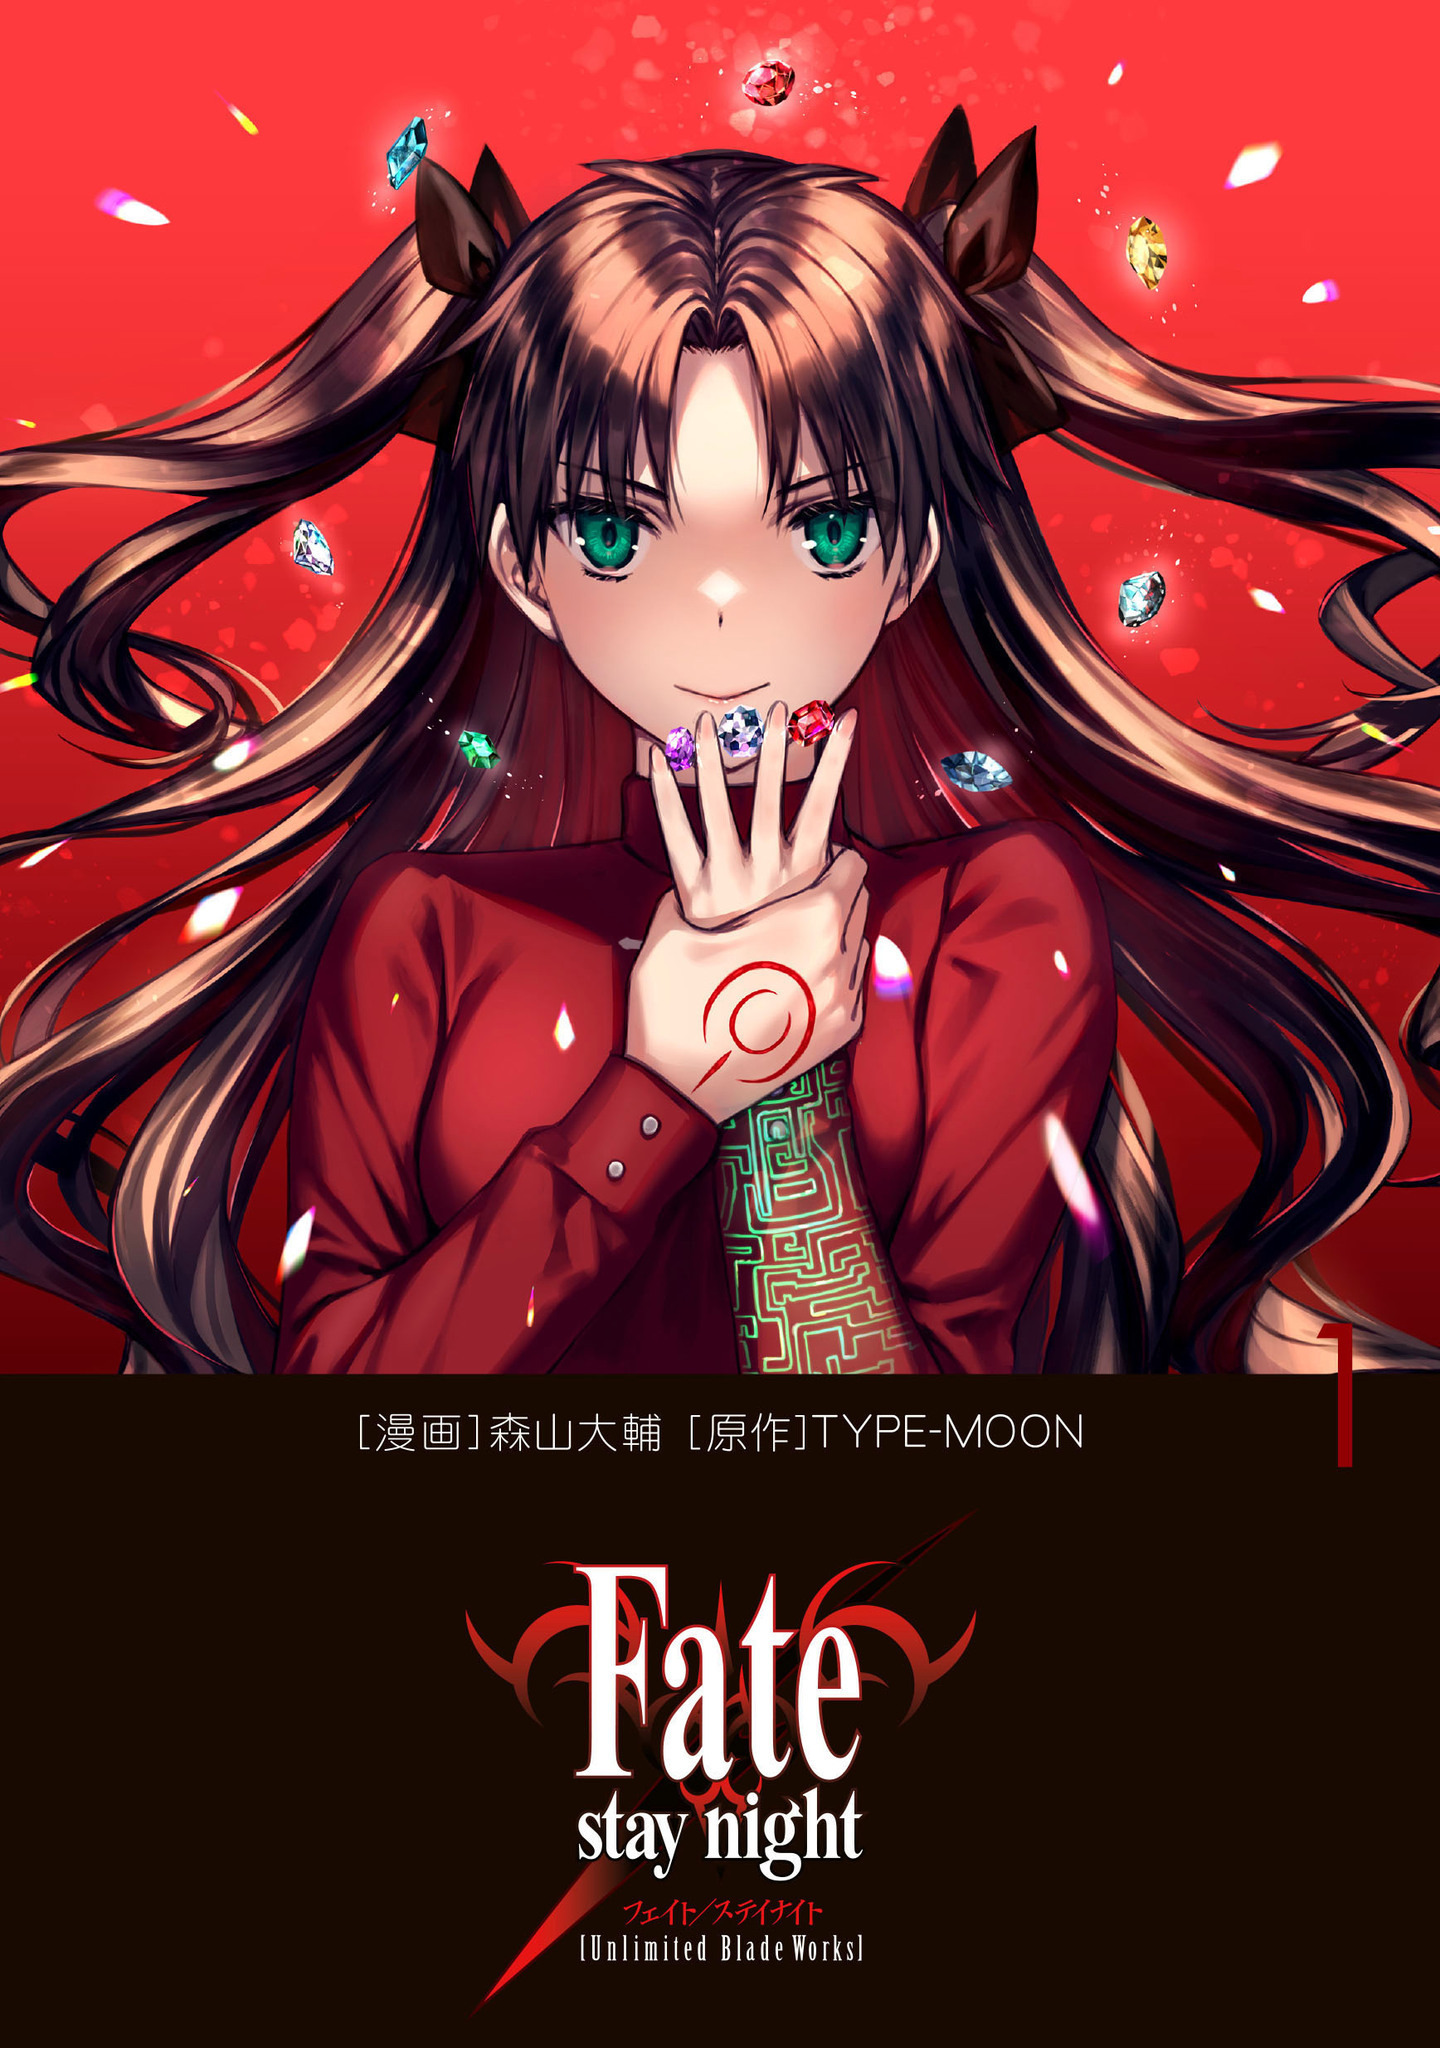 Fate/stay night フェイト/ステイナイト 遠坂 凛